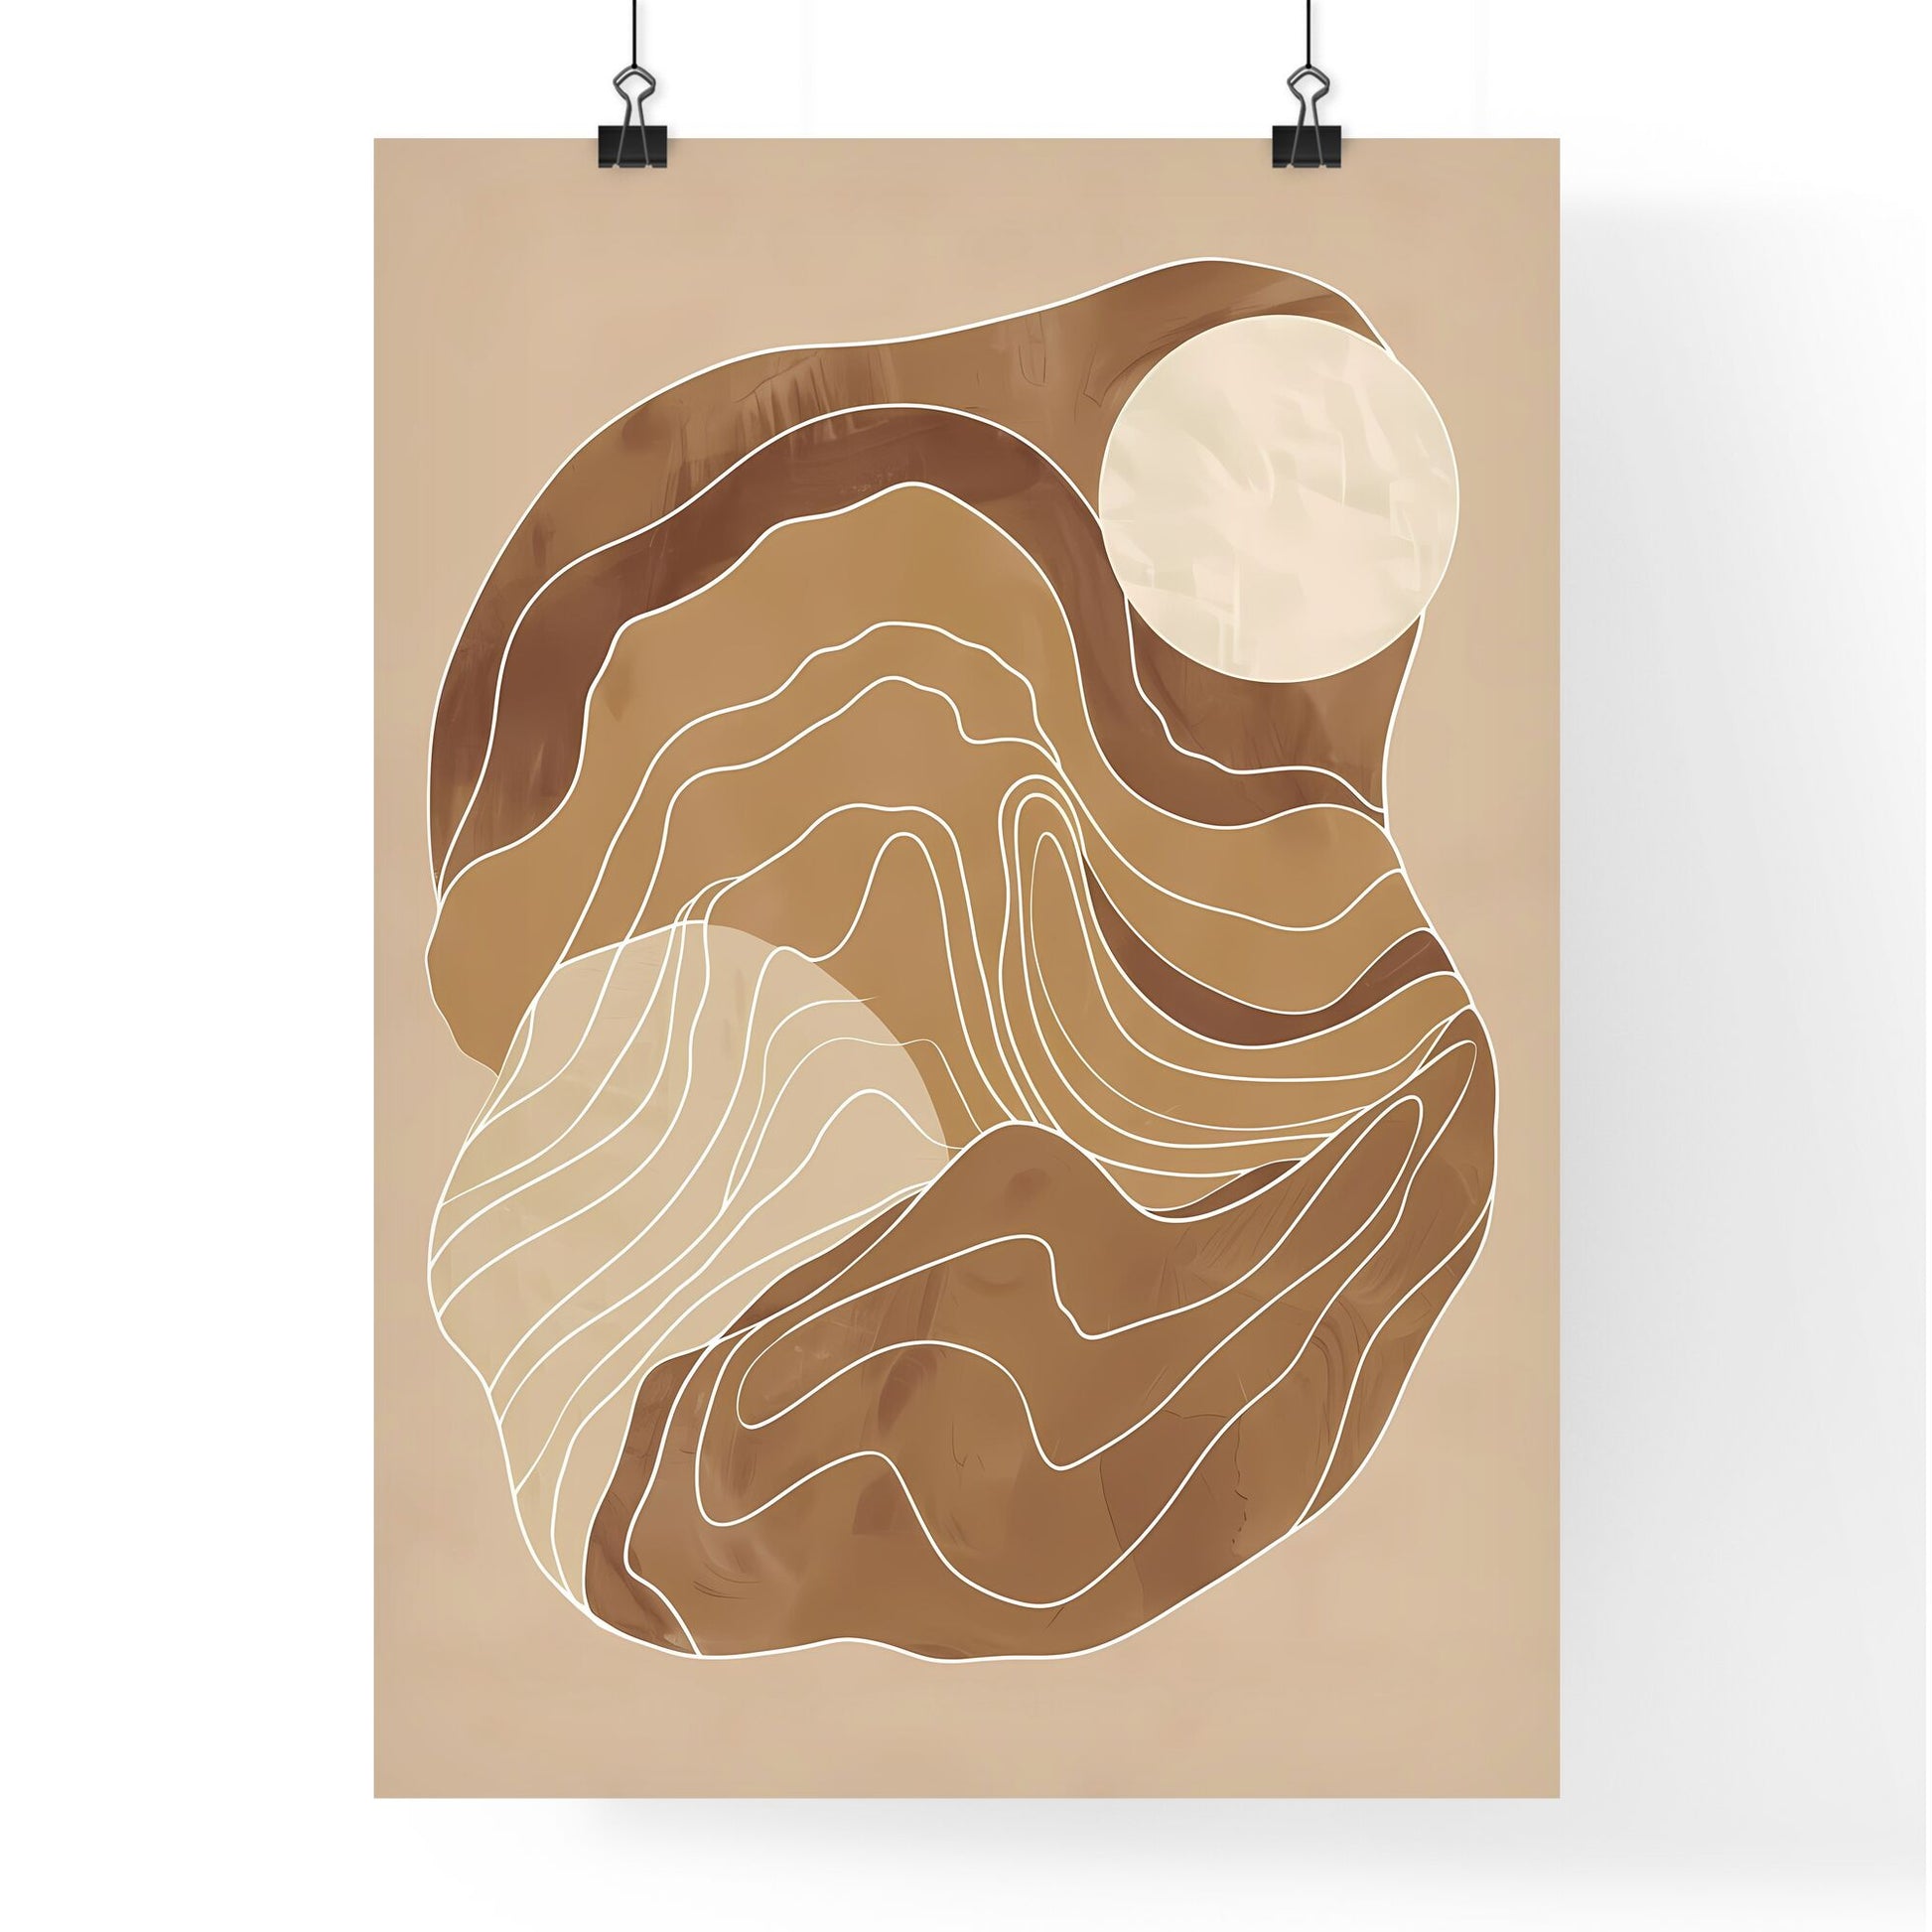 Minimalist Art Poster: Brown and White Gouache Painting, One Line Papier Couché, Muted Palette Default Title